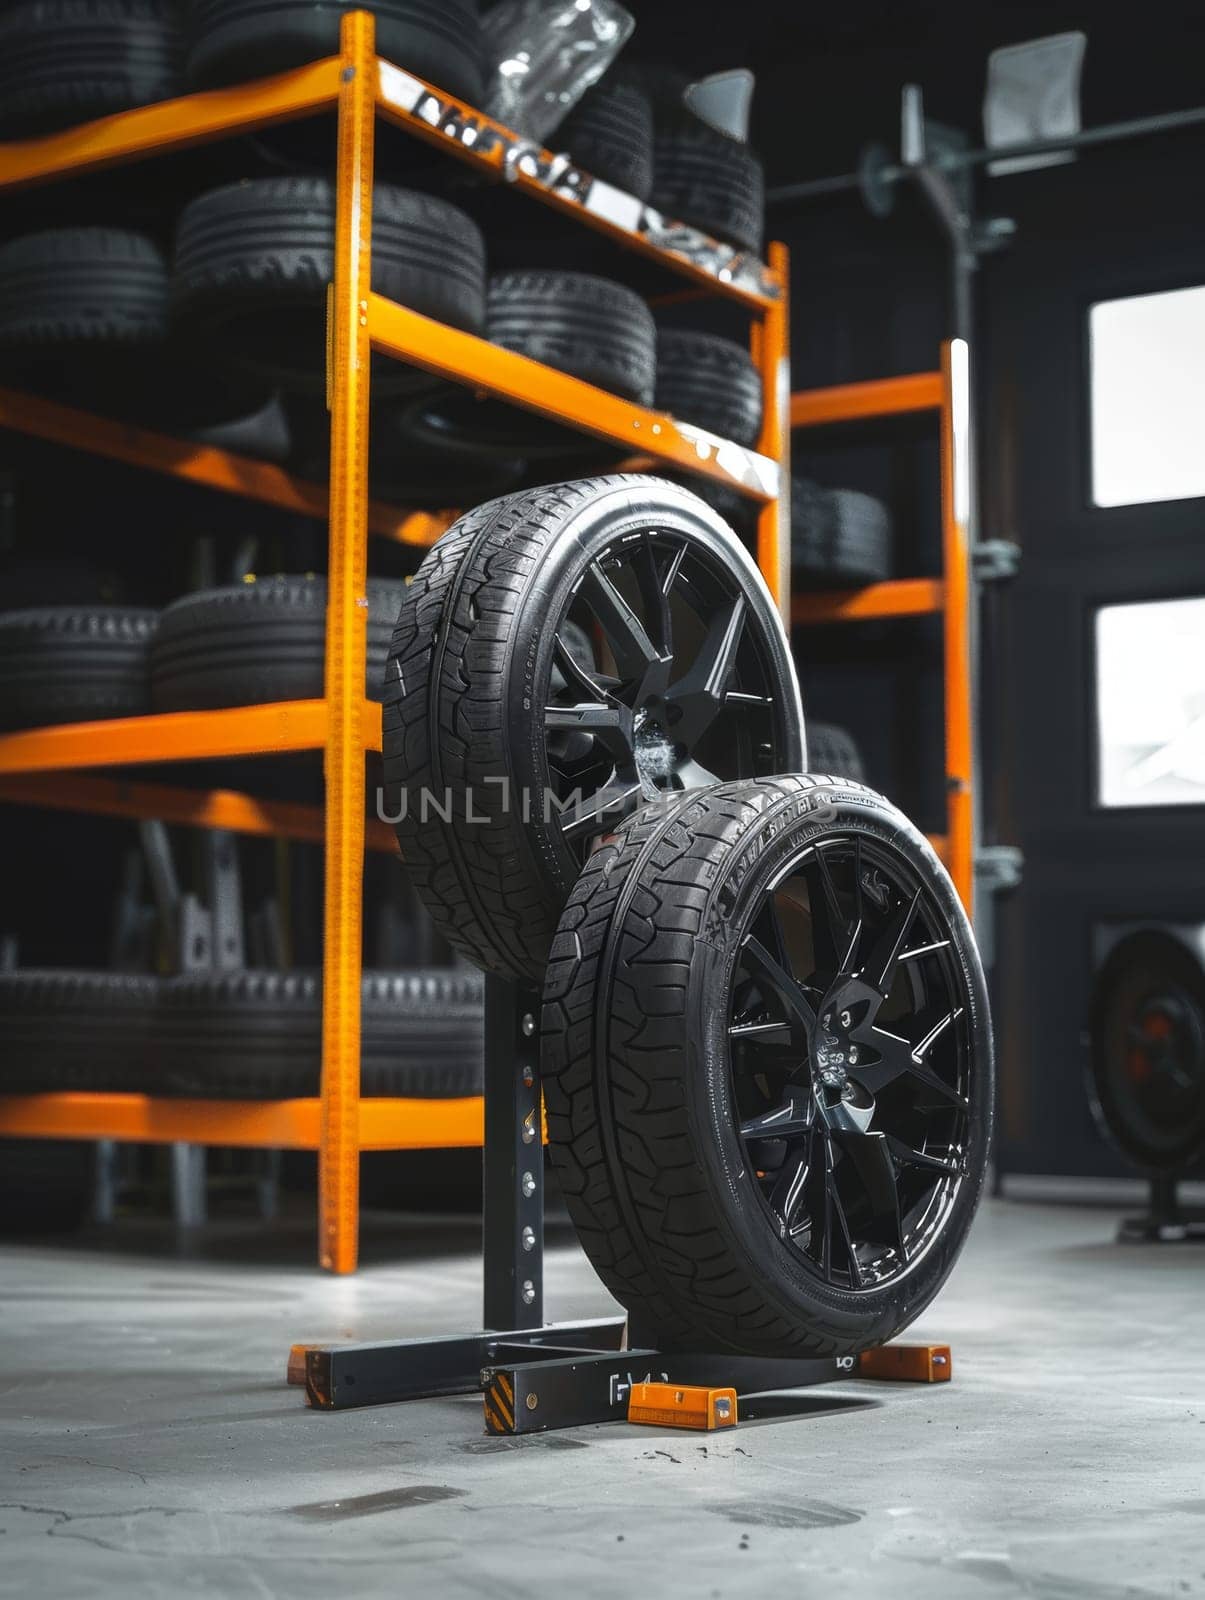 A single black tire stands on a minimalist yellow display stand, creating a striking visual in an automotive workshop, with a focus on the tire's design and tread